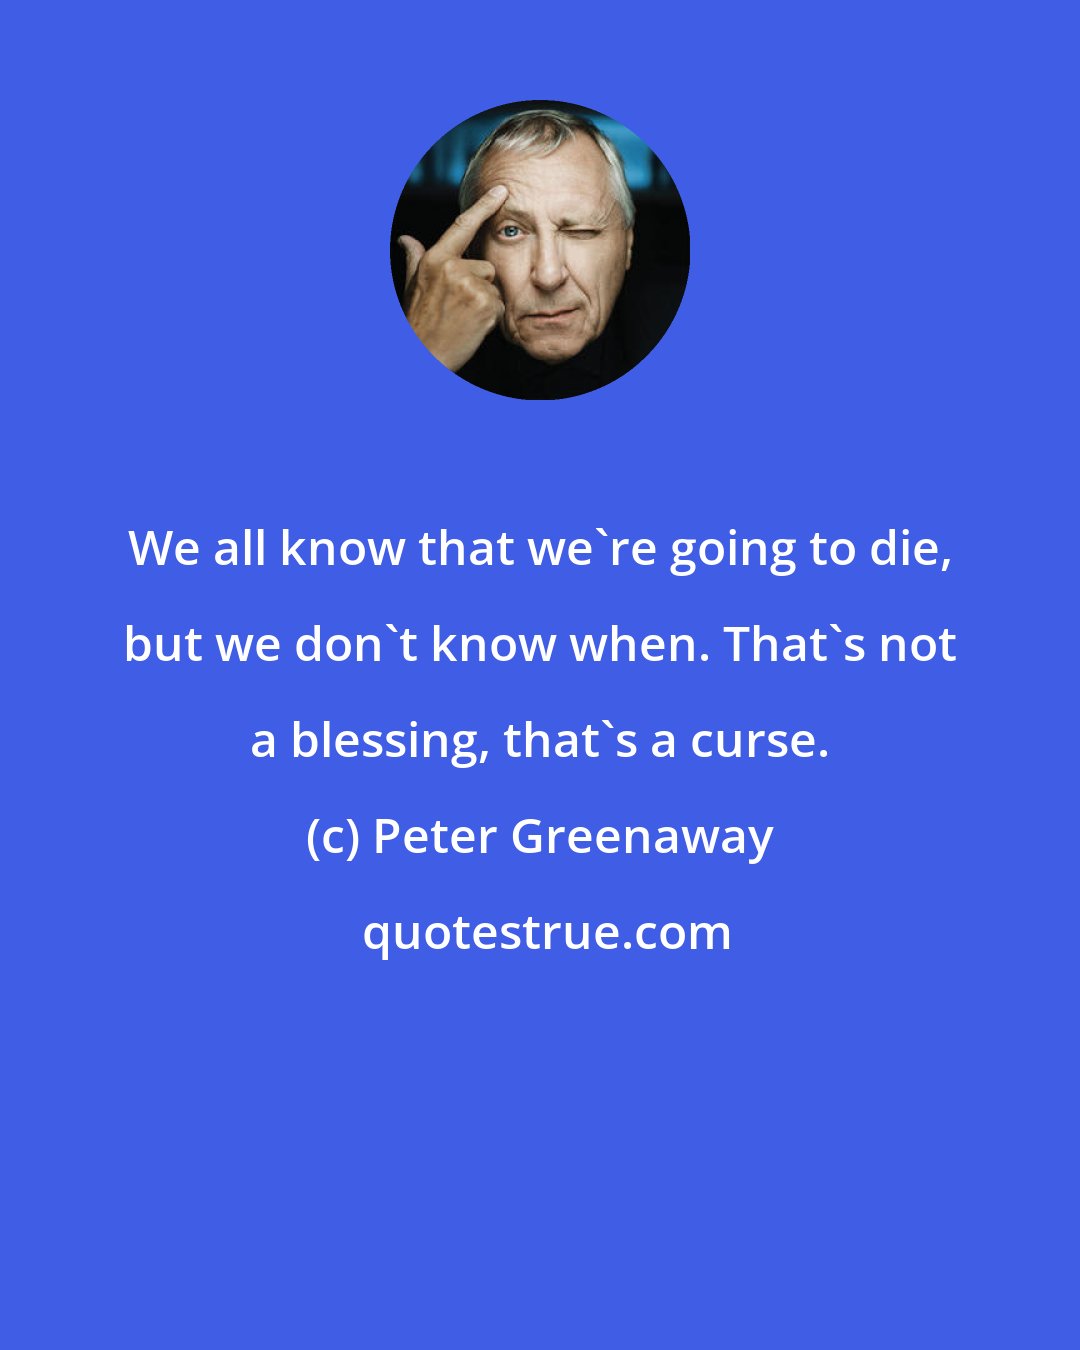 Peter Greenaway: We all know that we're going to die, but we don't know when. That's not a blessing, that's a curse.